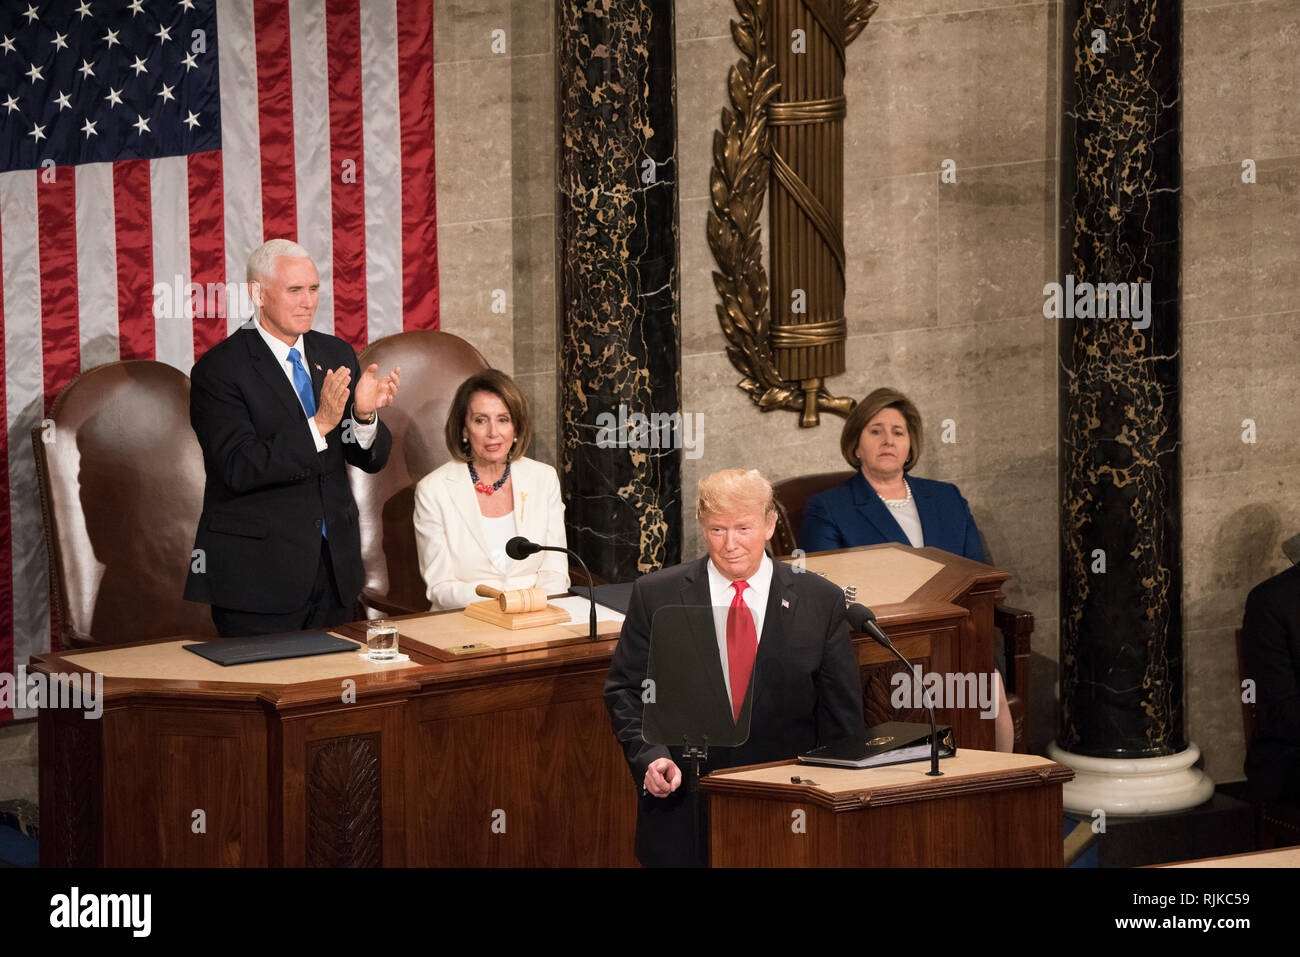 Washington, USA. 05th Feb, 2019. Washington DC, February 5, 2019, USA: President Donald J Trump gives his second State of the Union (SOTU) address as President. House Speaker Nancy Pelosi and Vice President Mike Pence sit behind him in the US Capitol House of Representatives. Credit: Patsy Lynch/Alamy Live News Stock Photo